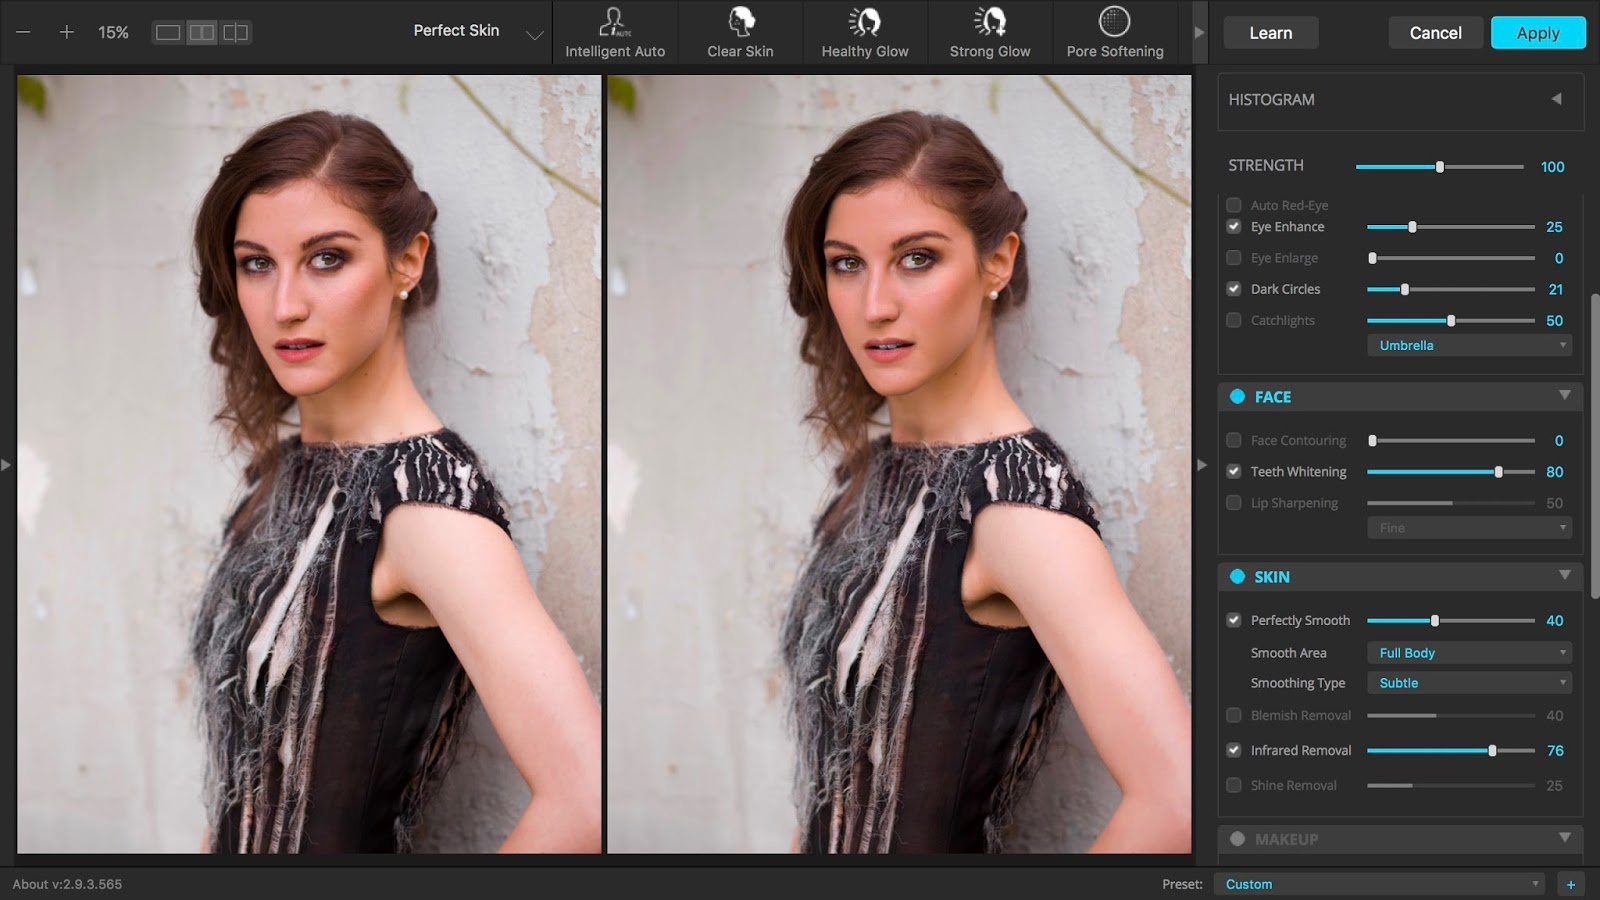 perfectly clear lightroom plug in